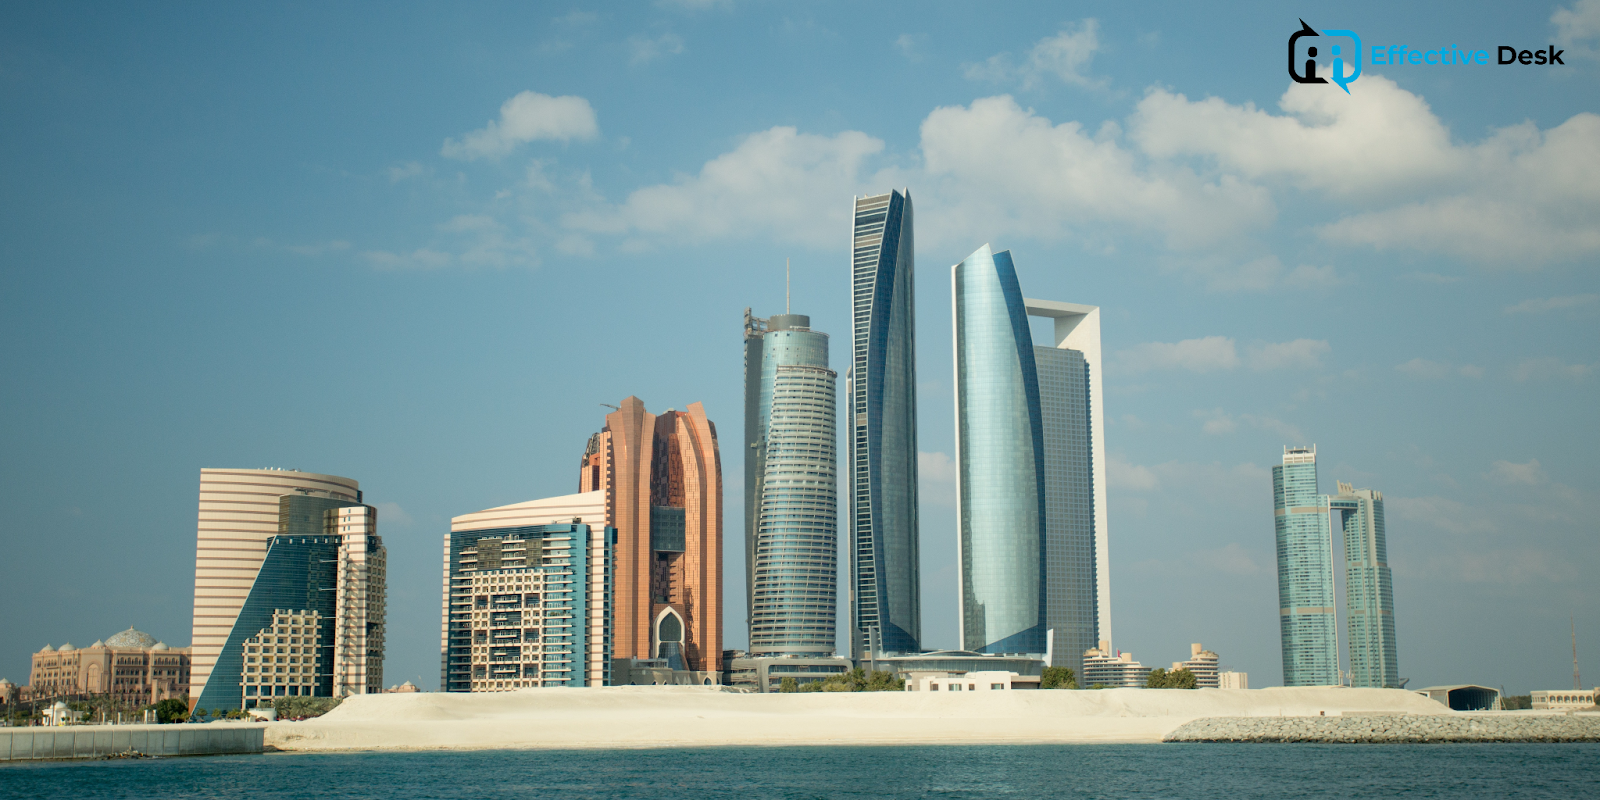 What's the price to open a new company within Abu Dhabi?
